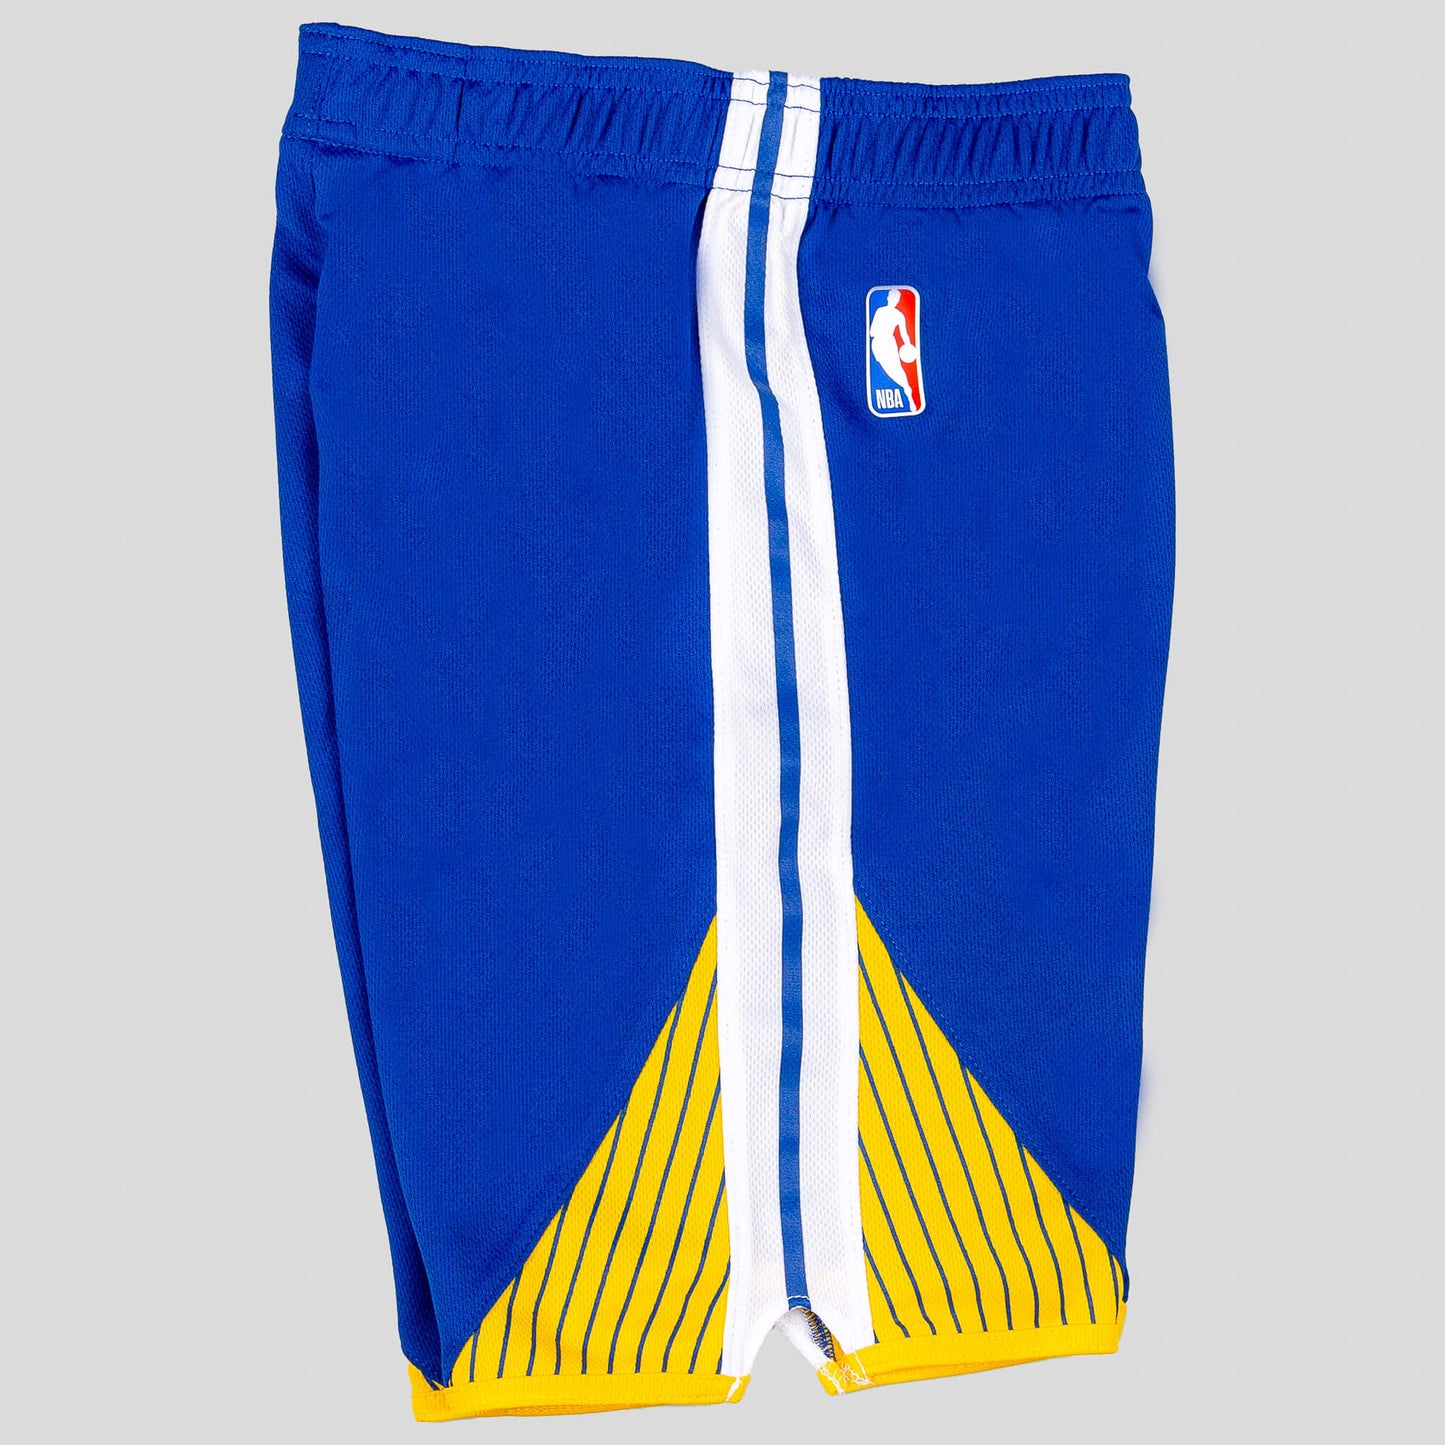 Nike 0-7 Icon Replica Short Golden State Warriors Blue/Yellow